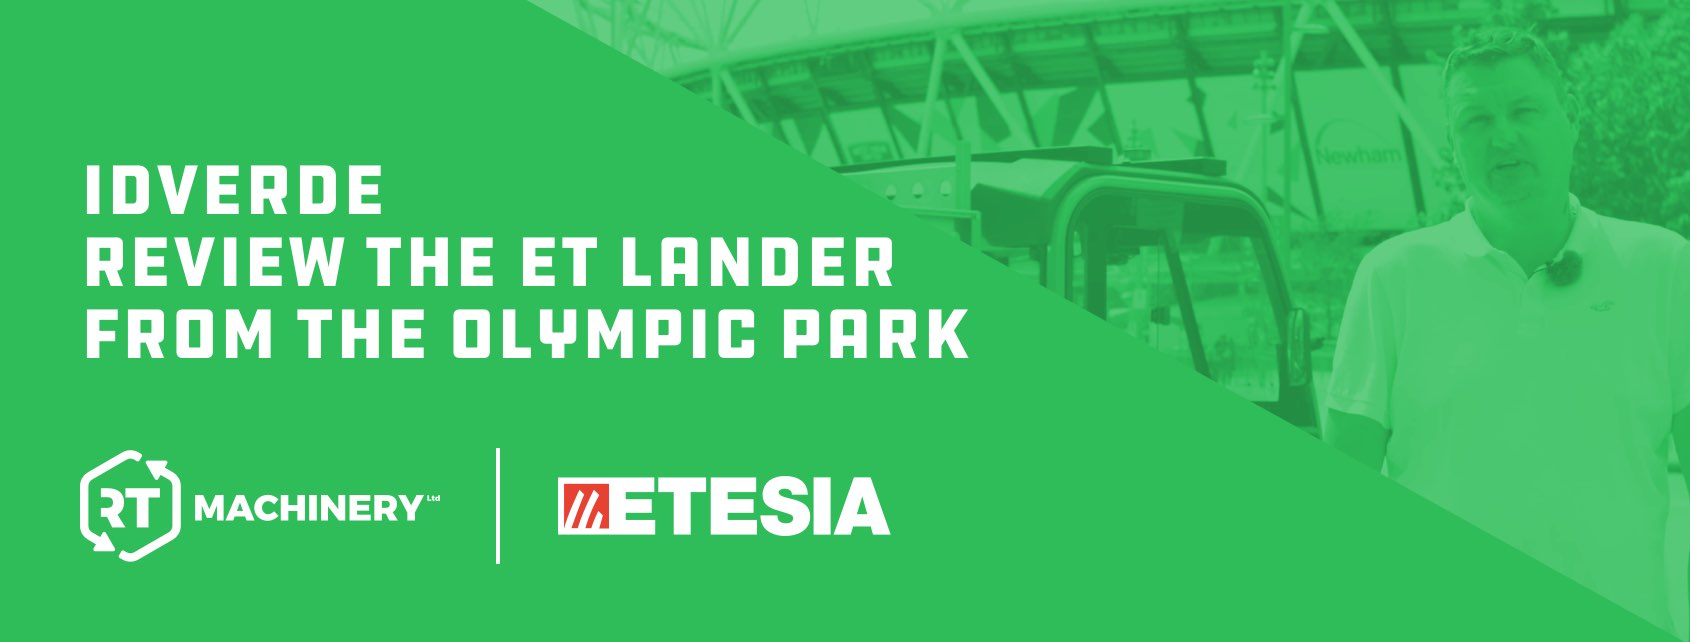 idverde UK Review the ET Lander from the Olympic Park